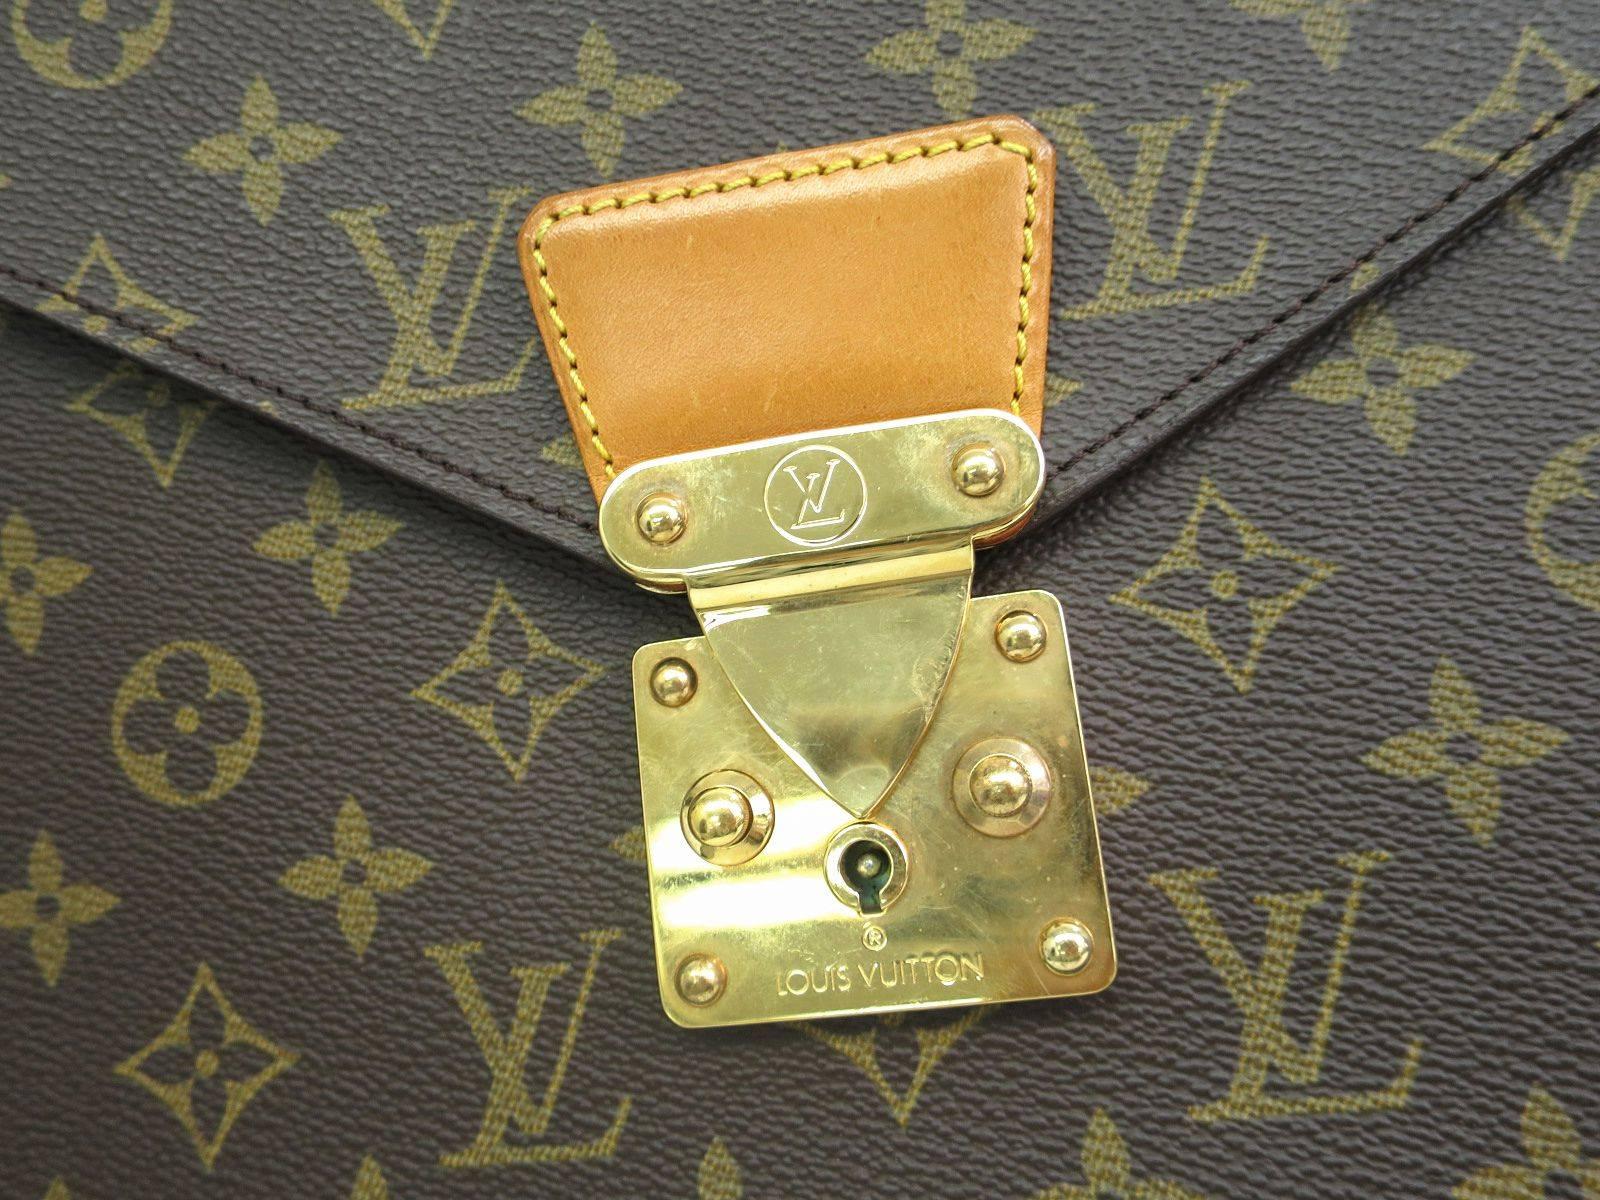 CURATOR'S NOTES

Monogram Canvas
Gold hardware
Slide lock closure
Made in France
Date code CT0960
Measures 14.2